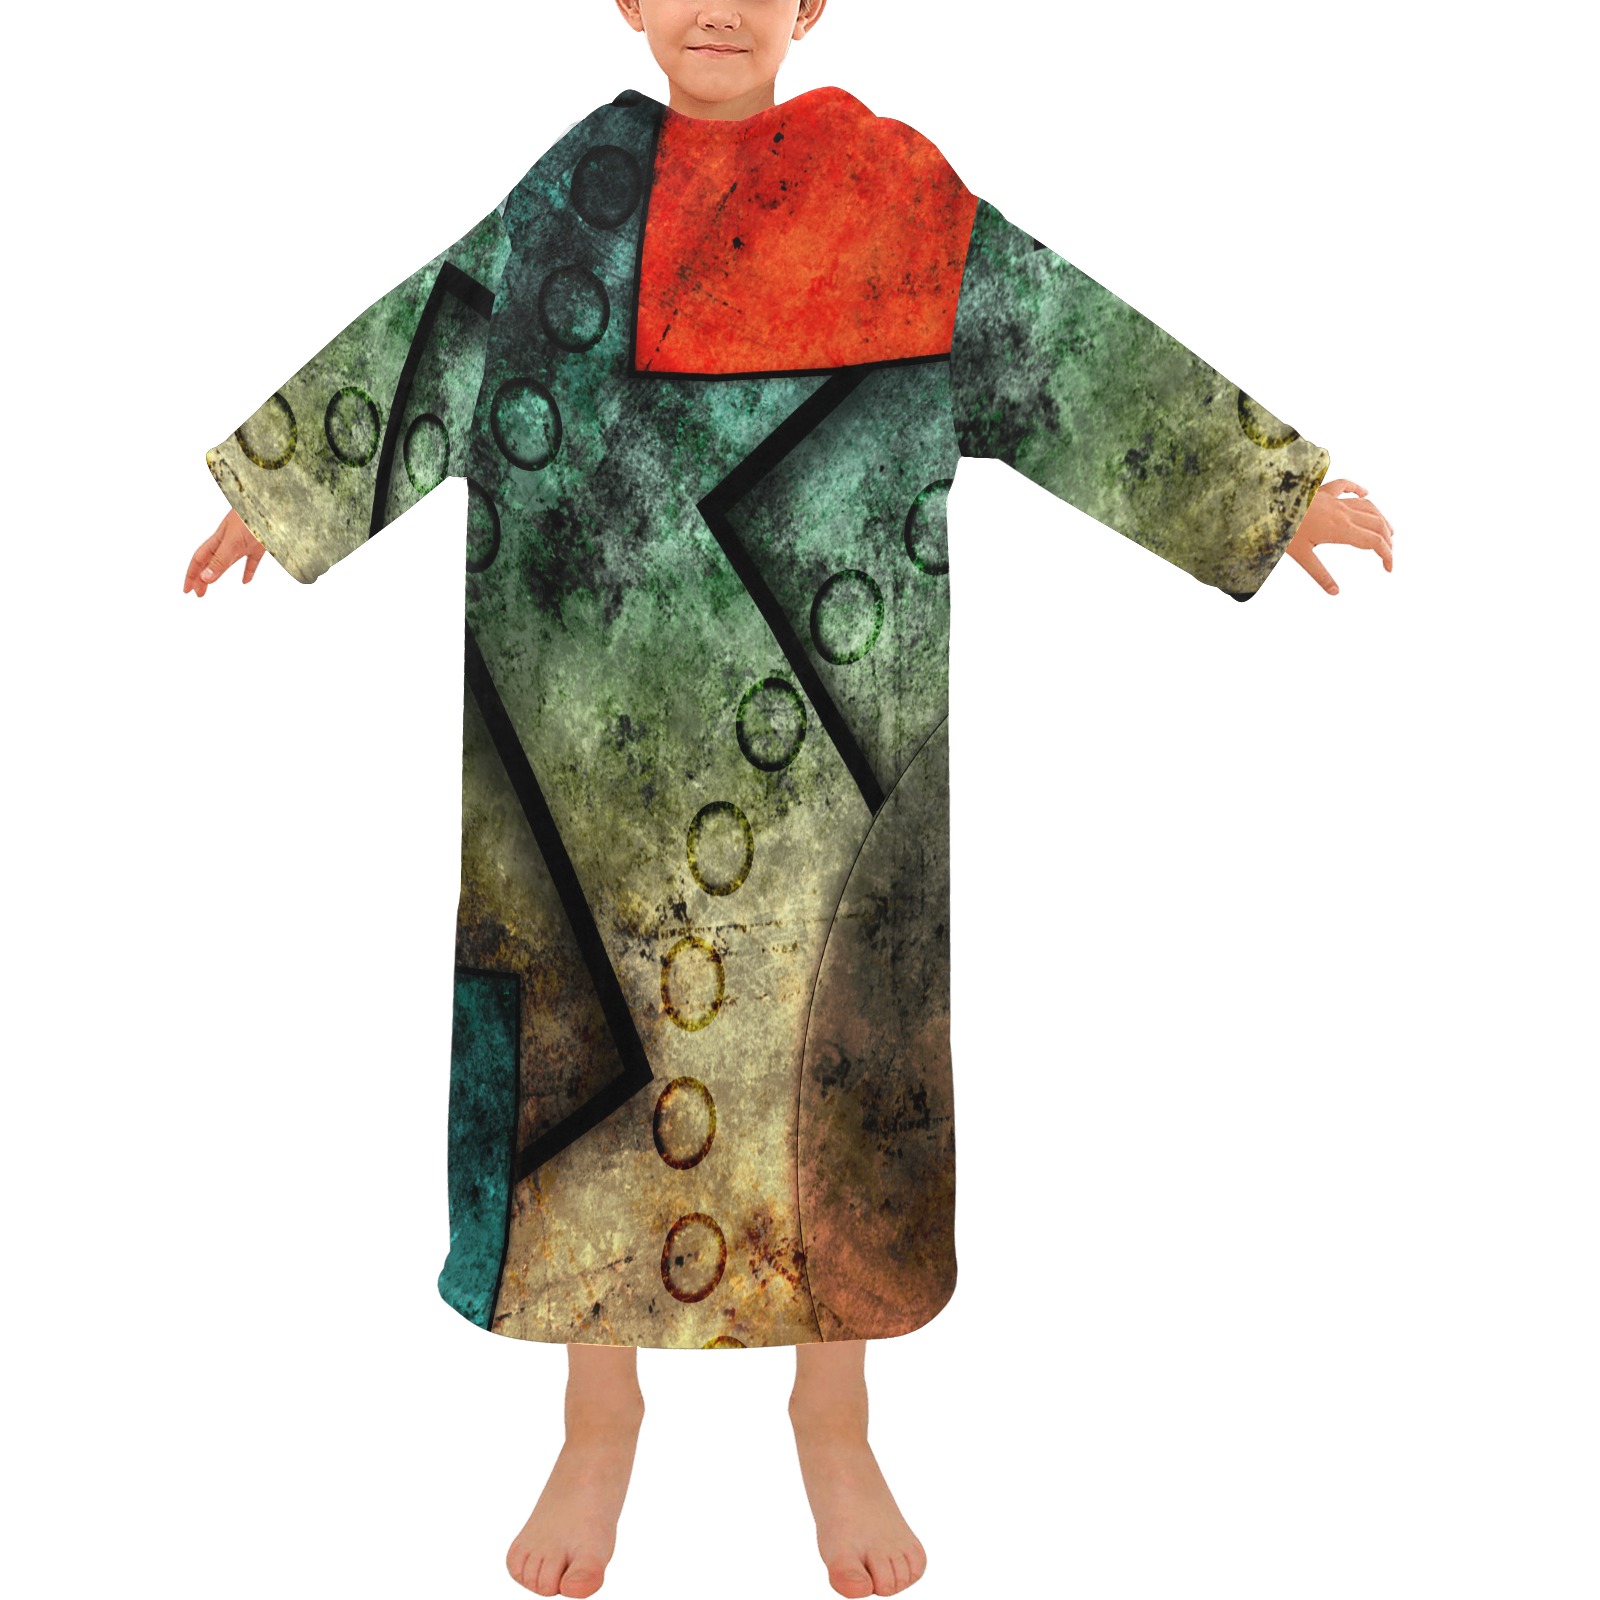 ORGANIZEDCHAOS Blanket Robe with Sleeves for Kids